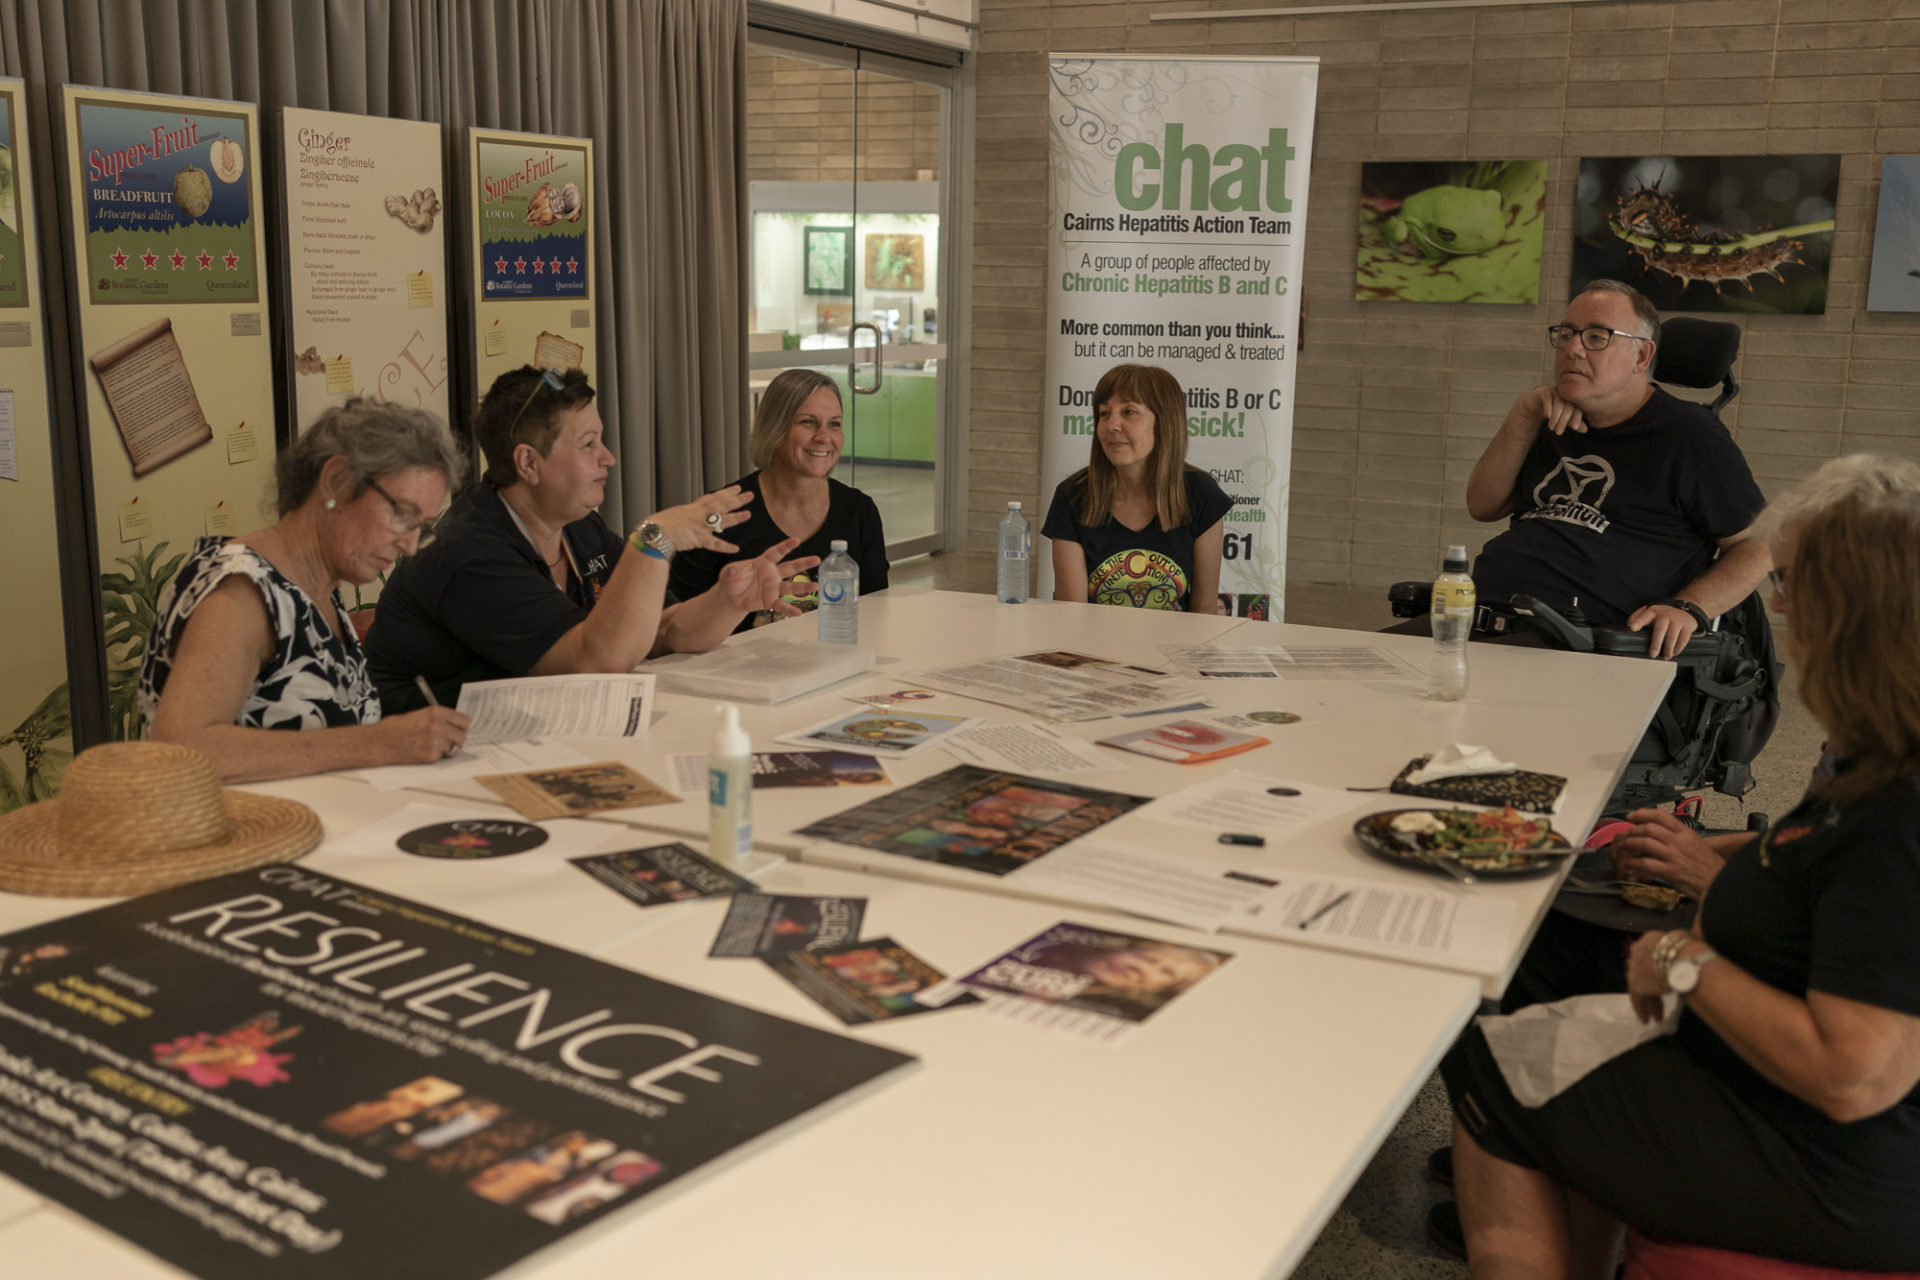 Members of the Cairns Hepatitis Action Team (CHAT) hold a meeting with staff from Cairns Sexual Health Service and local Councillor Rob Pyne.